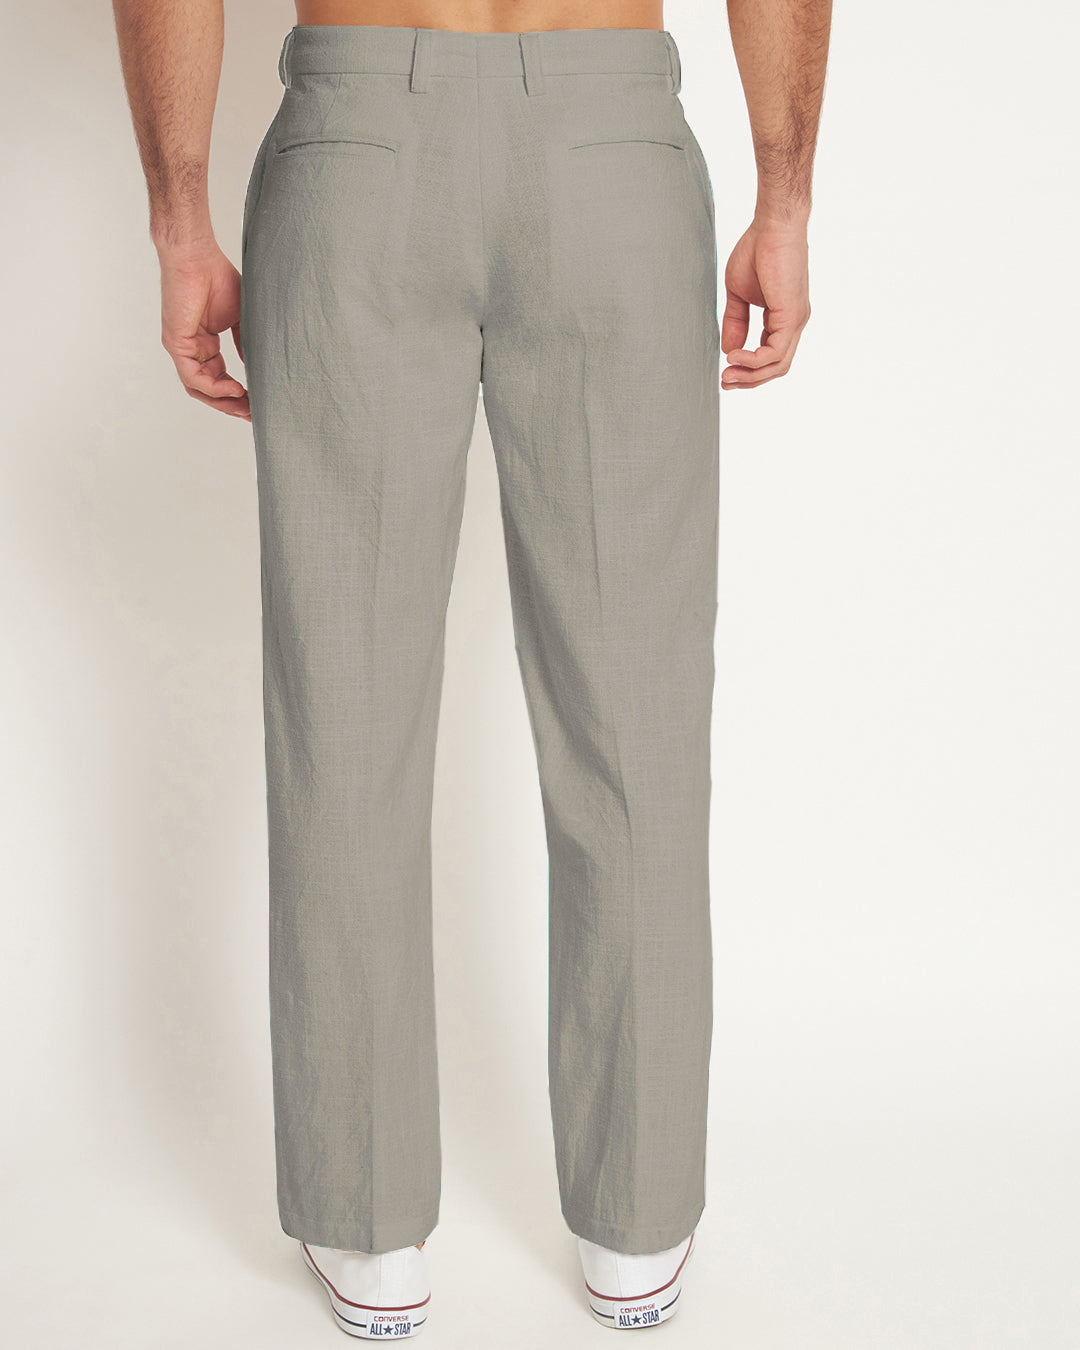 Casual Ease Iced Grey Men's Pants